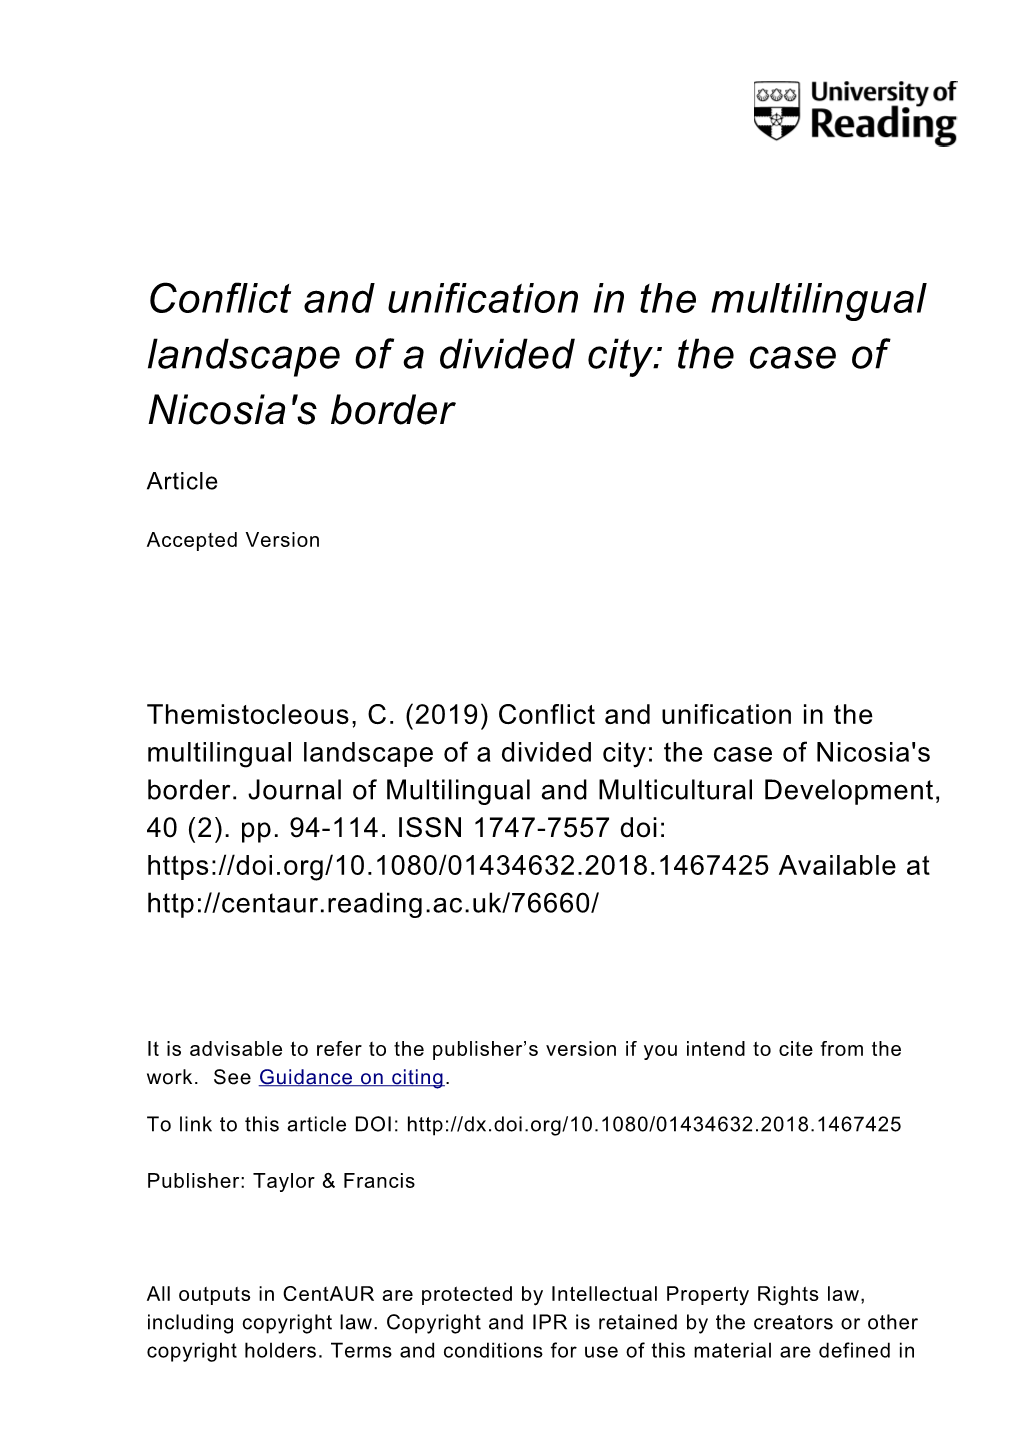 Conflict and Unification in the Multilingual Landscape of a Divided City: the Case of Nicosia's Border